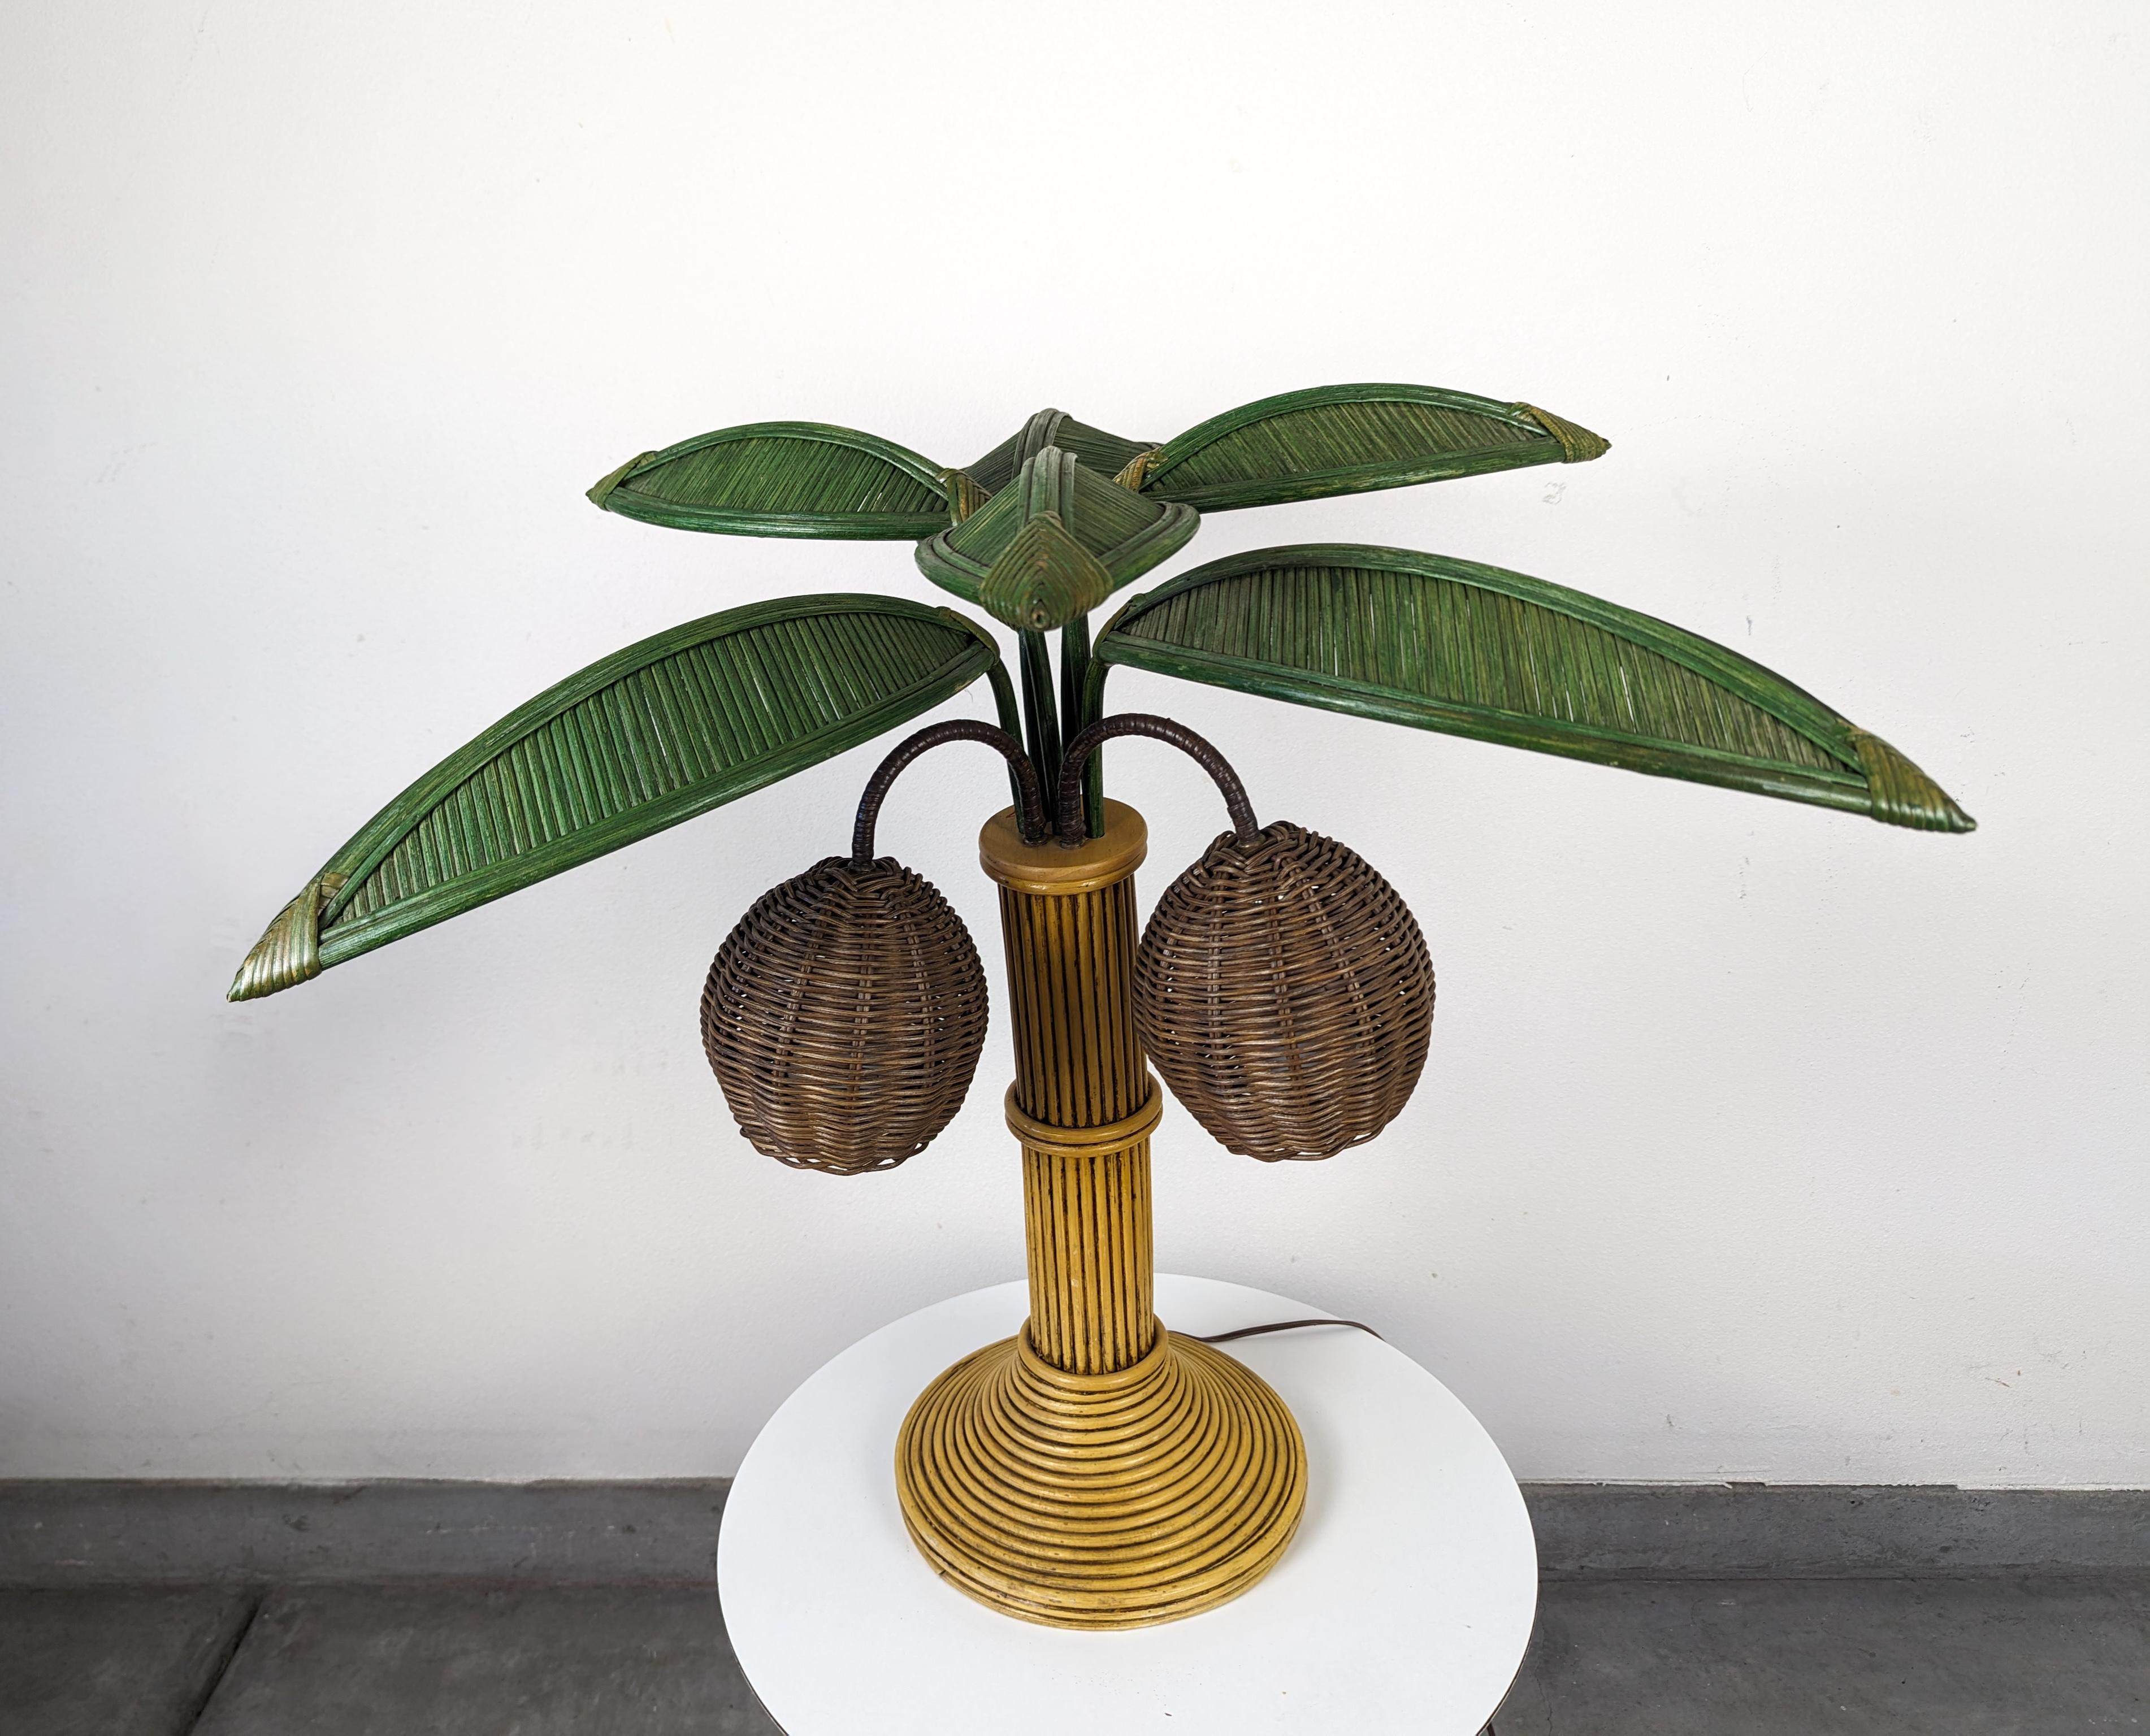 Just in, a beautiful pencil reed palm tree table lamp attributed to Mario Torres Lopez. Features removable/adjustable leaves to arrange how you like! 

Would pair well with any bohemian/coastal setting. If you have any questions, please feel free to